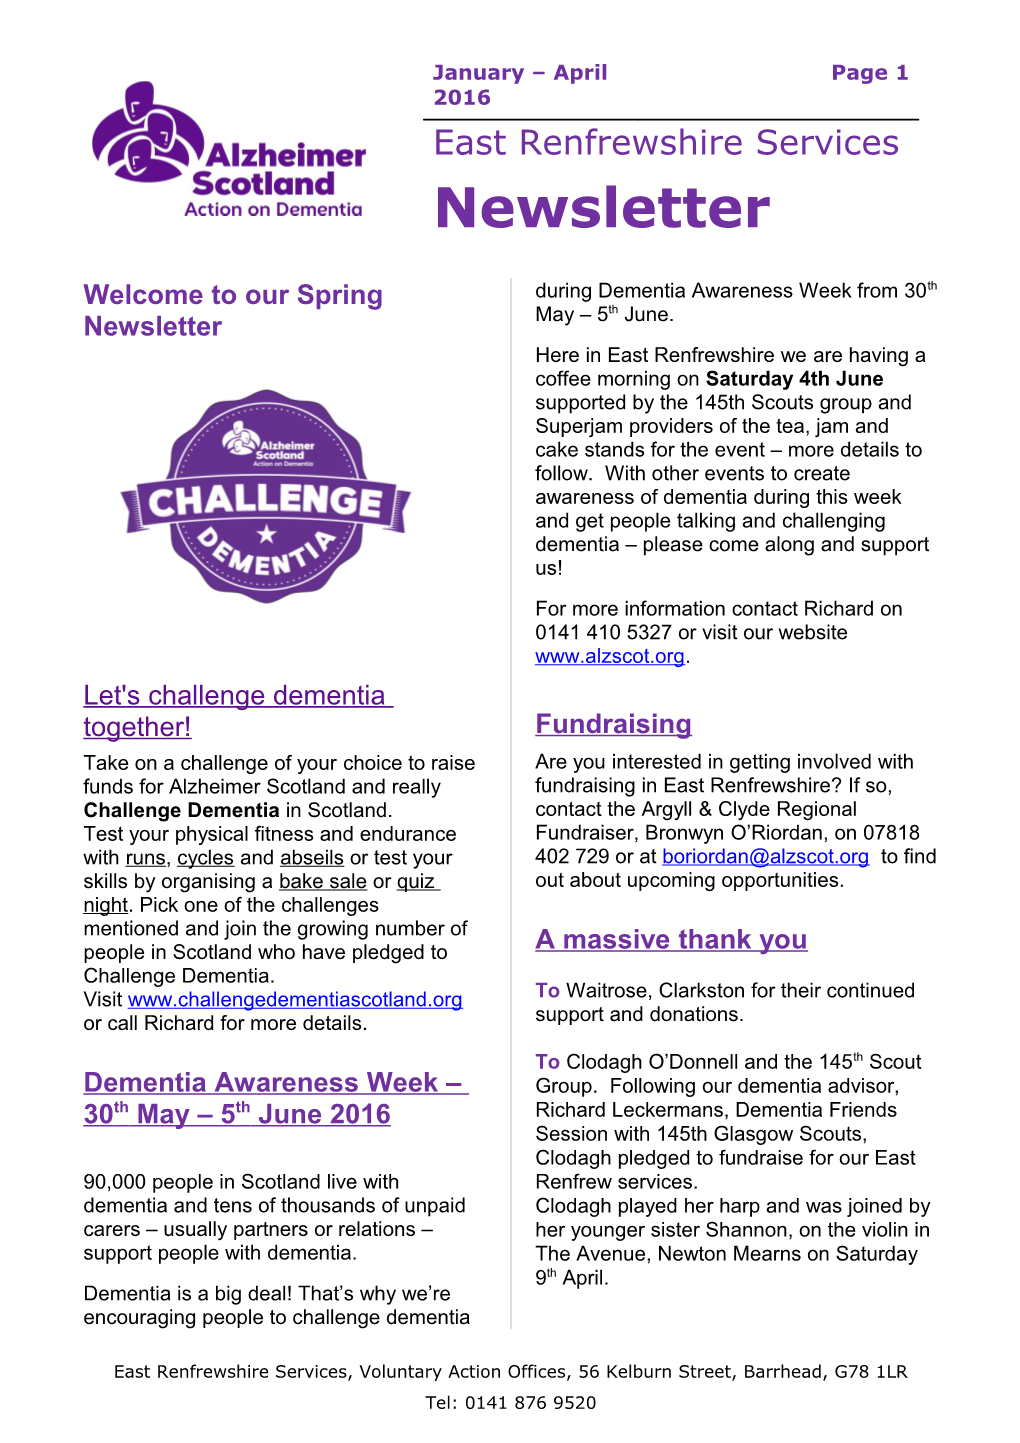 Welcome to Our Spring Newsletter